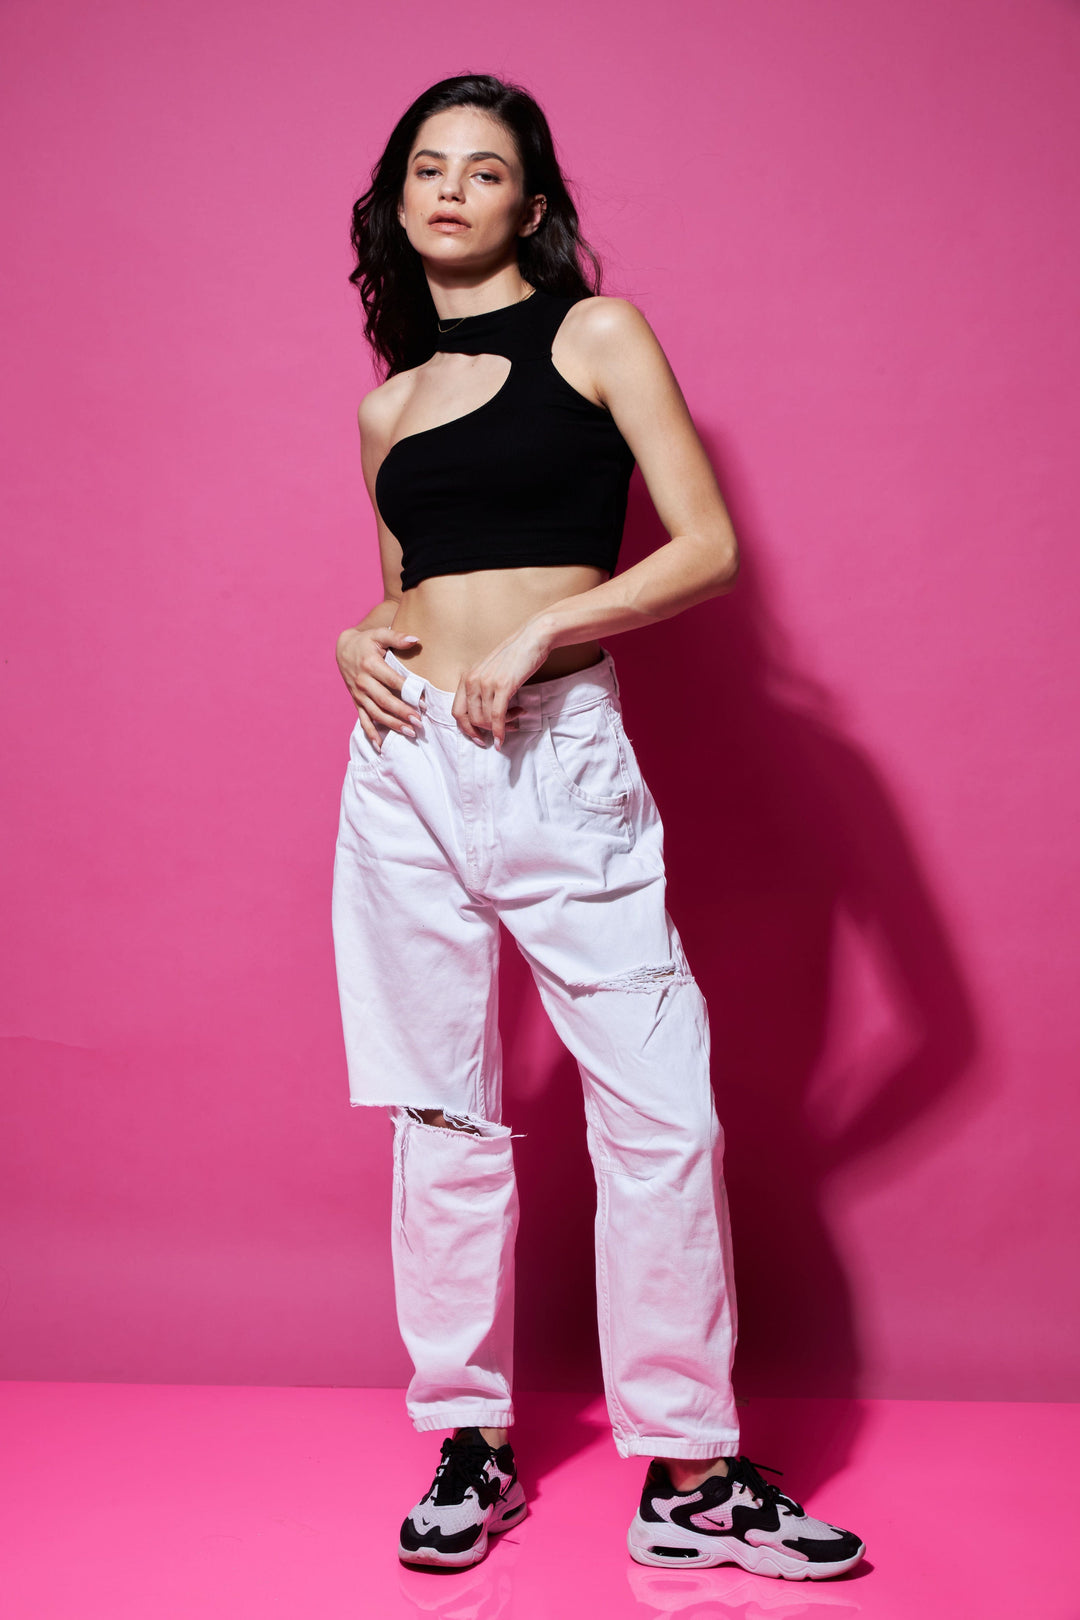 Out of the cut asymmetrical crop top